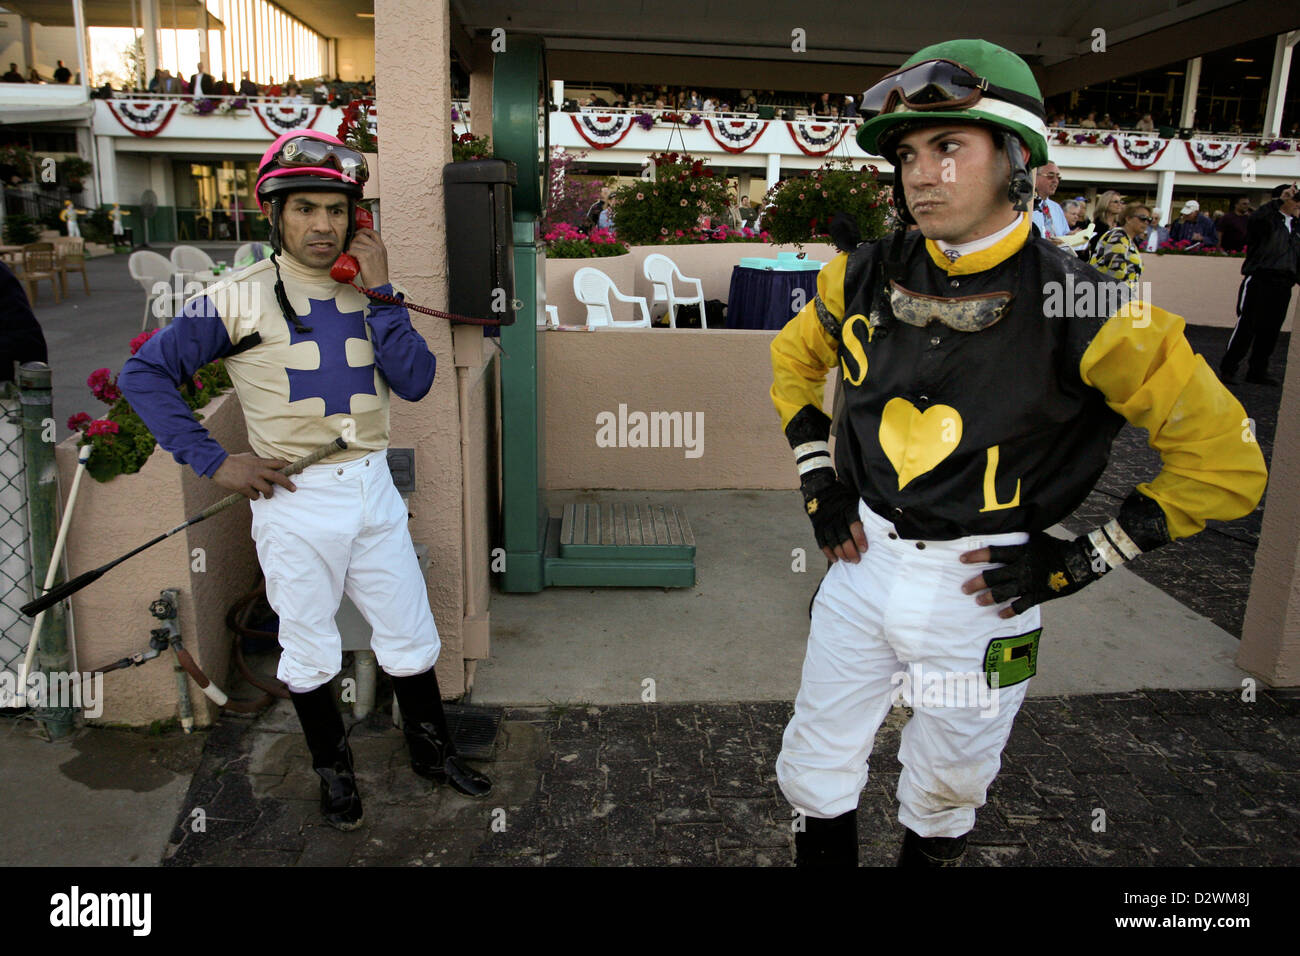 Feb. 2, 2013 - Oldsmar, Florida, U.S. - Falling Sky jockey LUIS SAEZ (L) talks to officials as Speak Logistics jockey ANGEL SERPA (R) waits to state his point of view after a protest of interference in the $250,000 Sam F. Davis Stakes at Tampa Bay Downs. Eventually the protest was dismissed and Falling Sky took the win. (Credit Image: © Daniel Wallace/Tampa Bay Times/ZUMAPRESS.com) Stock Photo